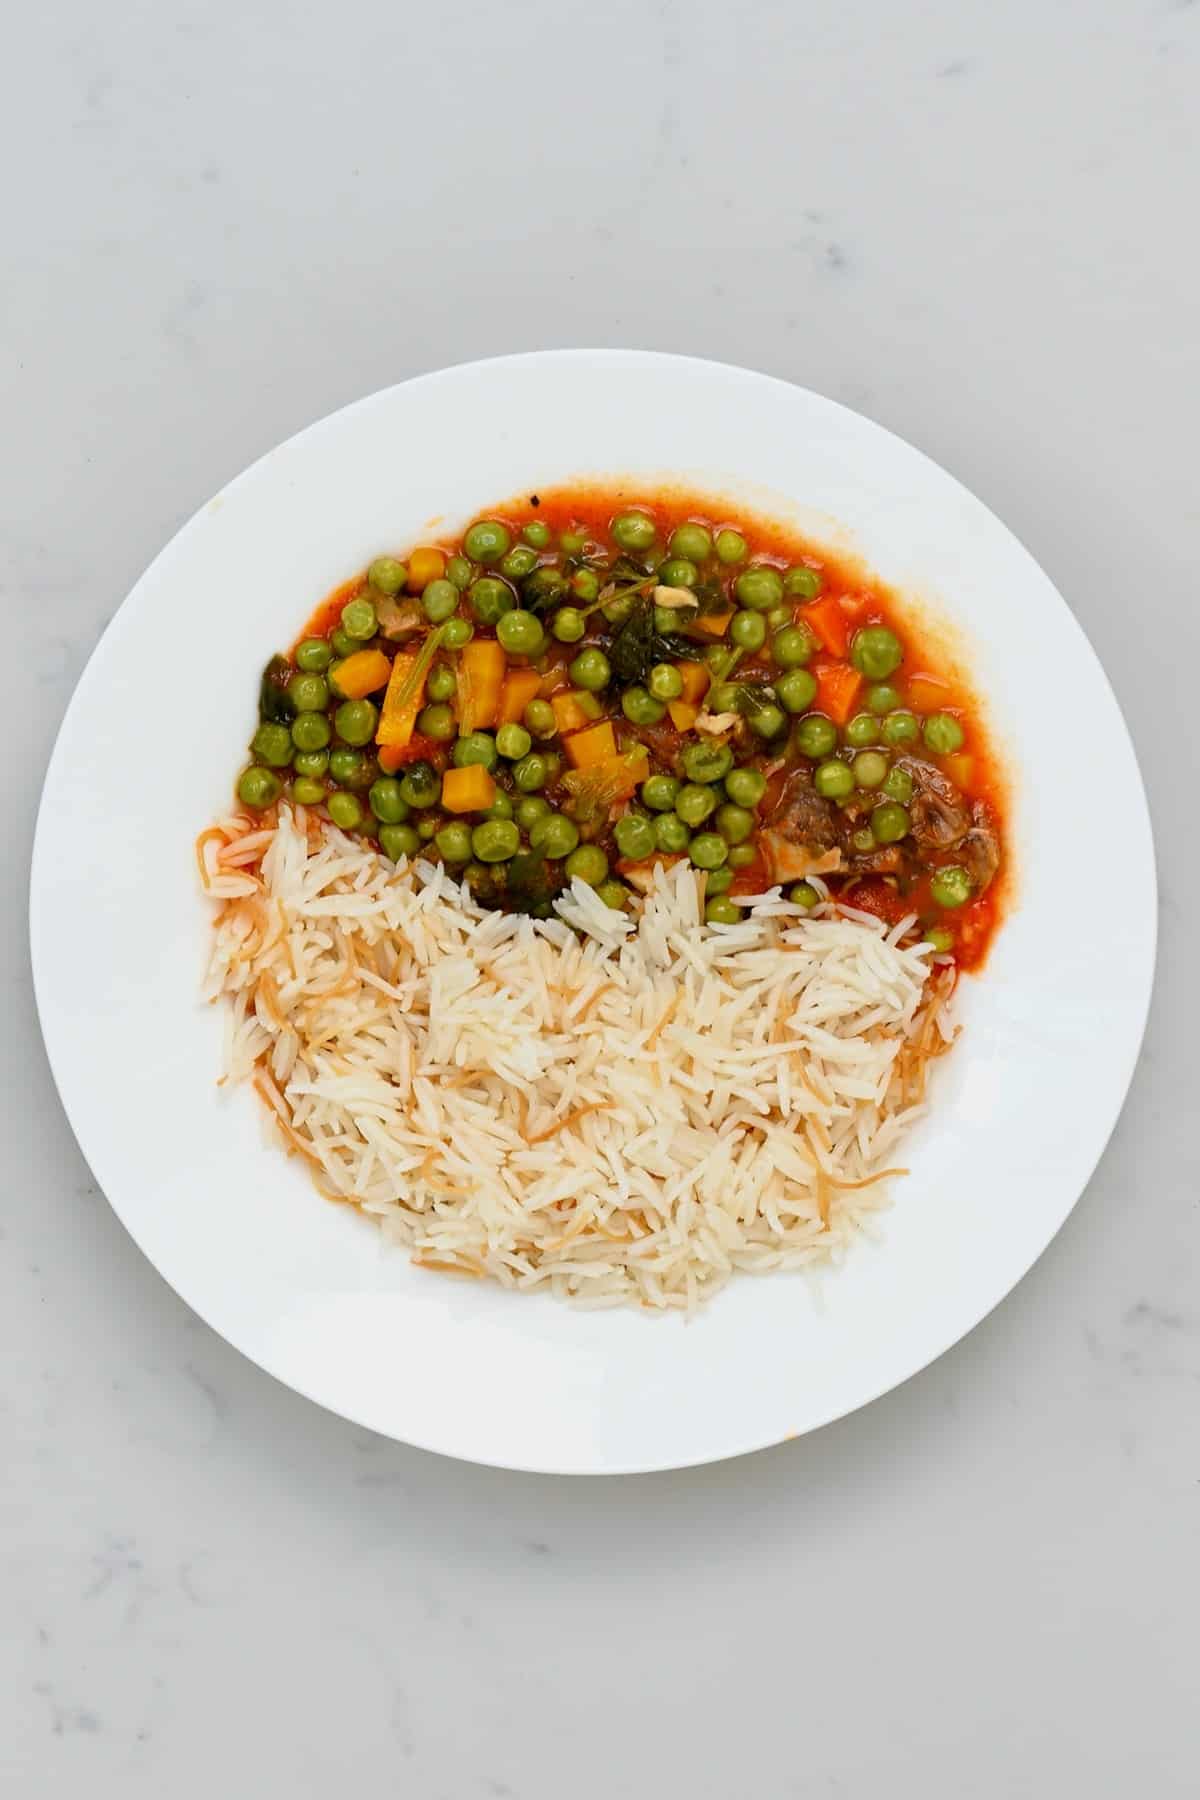 A serving of carrot pea stew and rice